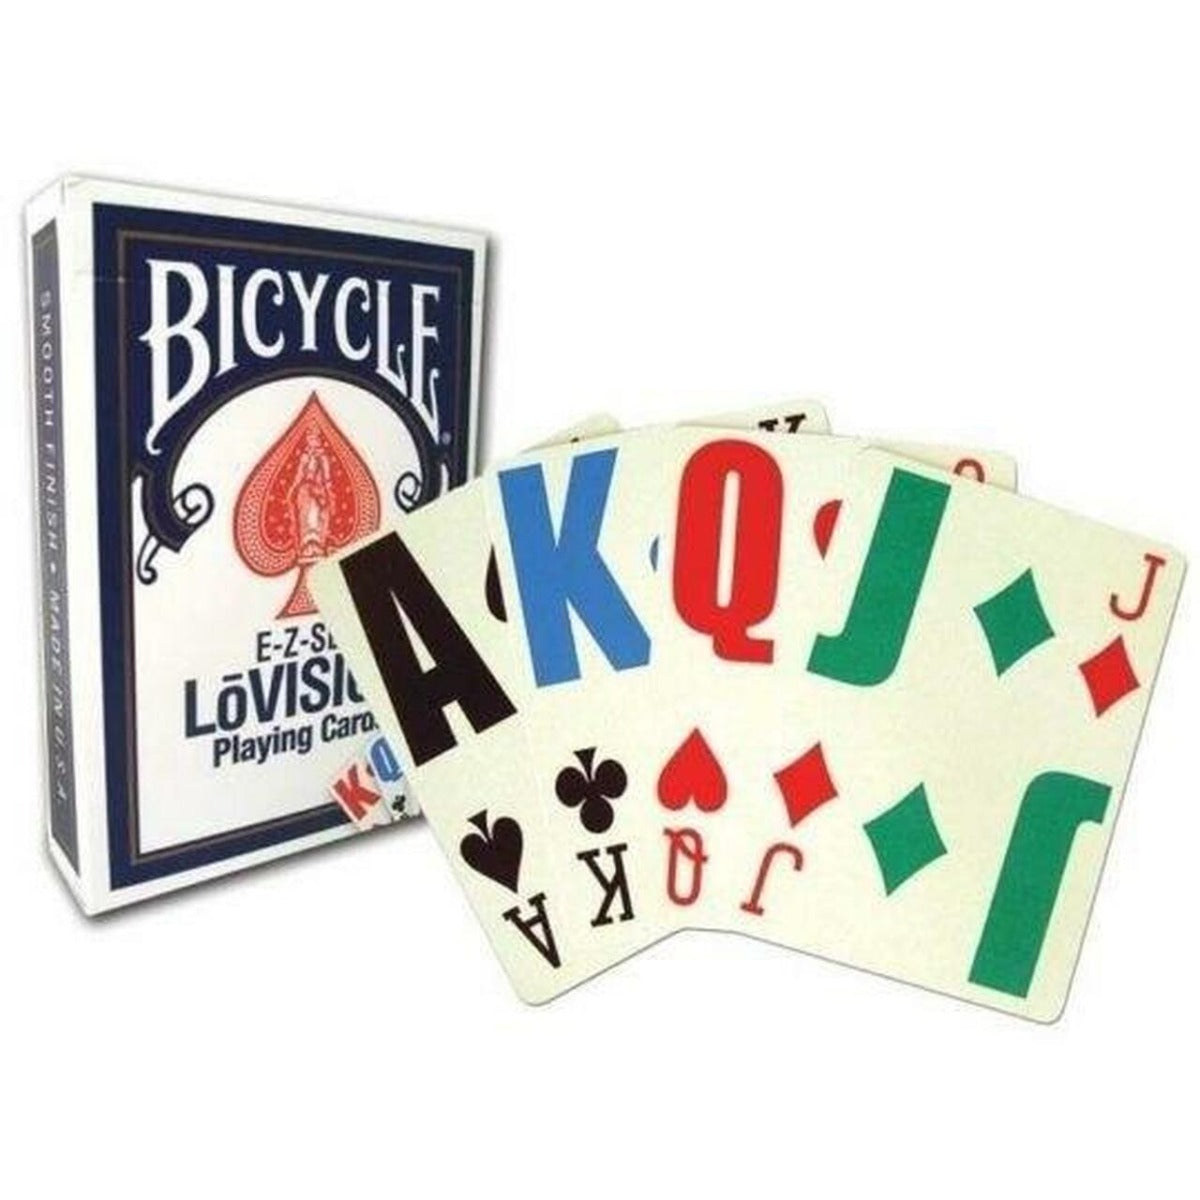 Bicycle E-Z See/Lo Vision Jumbo Index Playing Cards